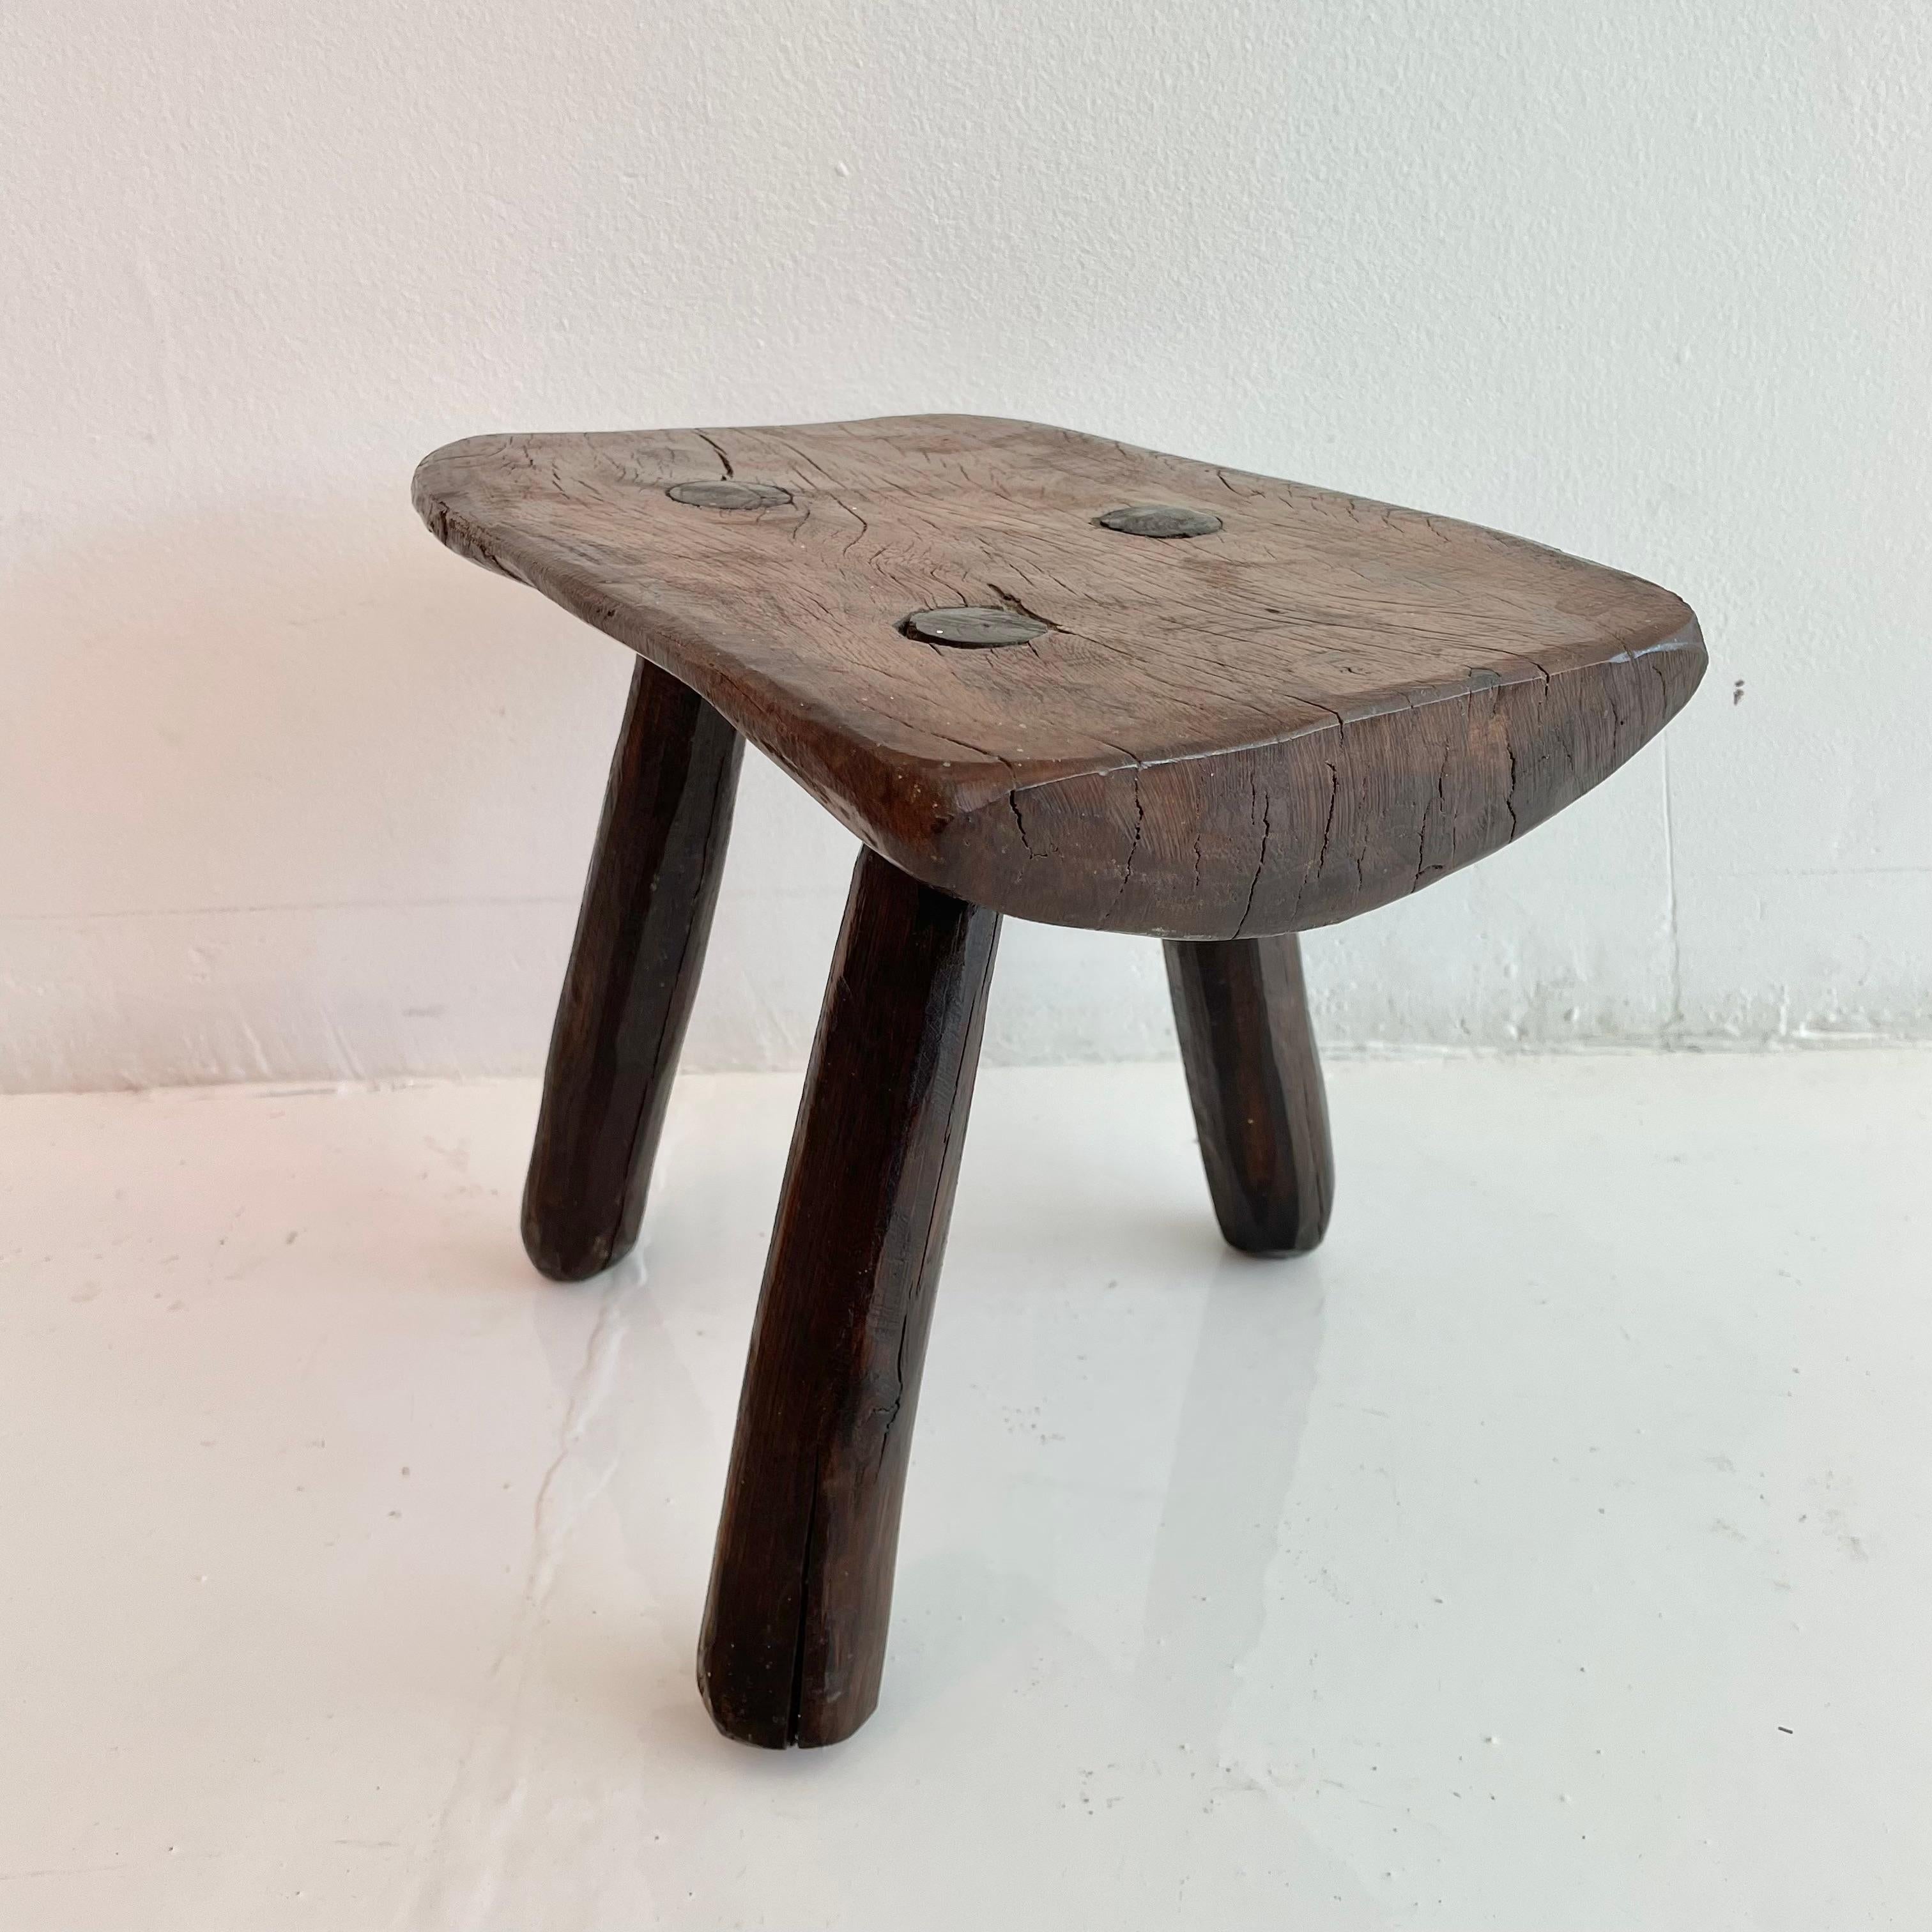 Stubby wooden tripod stool, made in France, circa 1950s. Thick brutalist seat with three rounded legs. No nails or hardware. Great shape and character. Petite stool with beautiful presence. Great vintage condition. Perfect for books or objects as